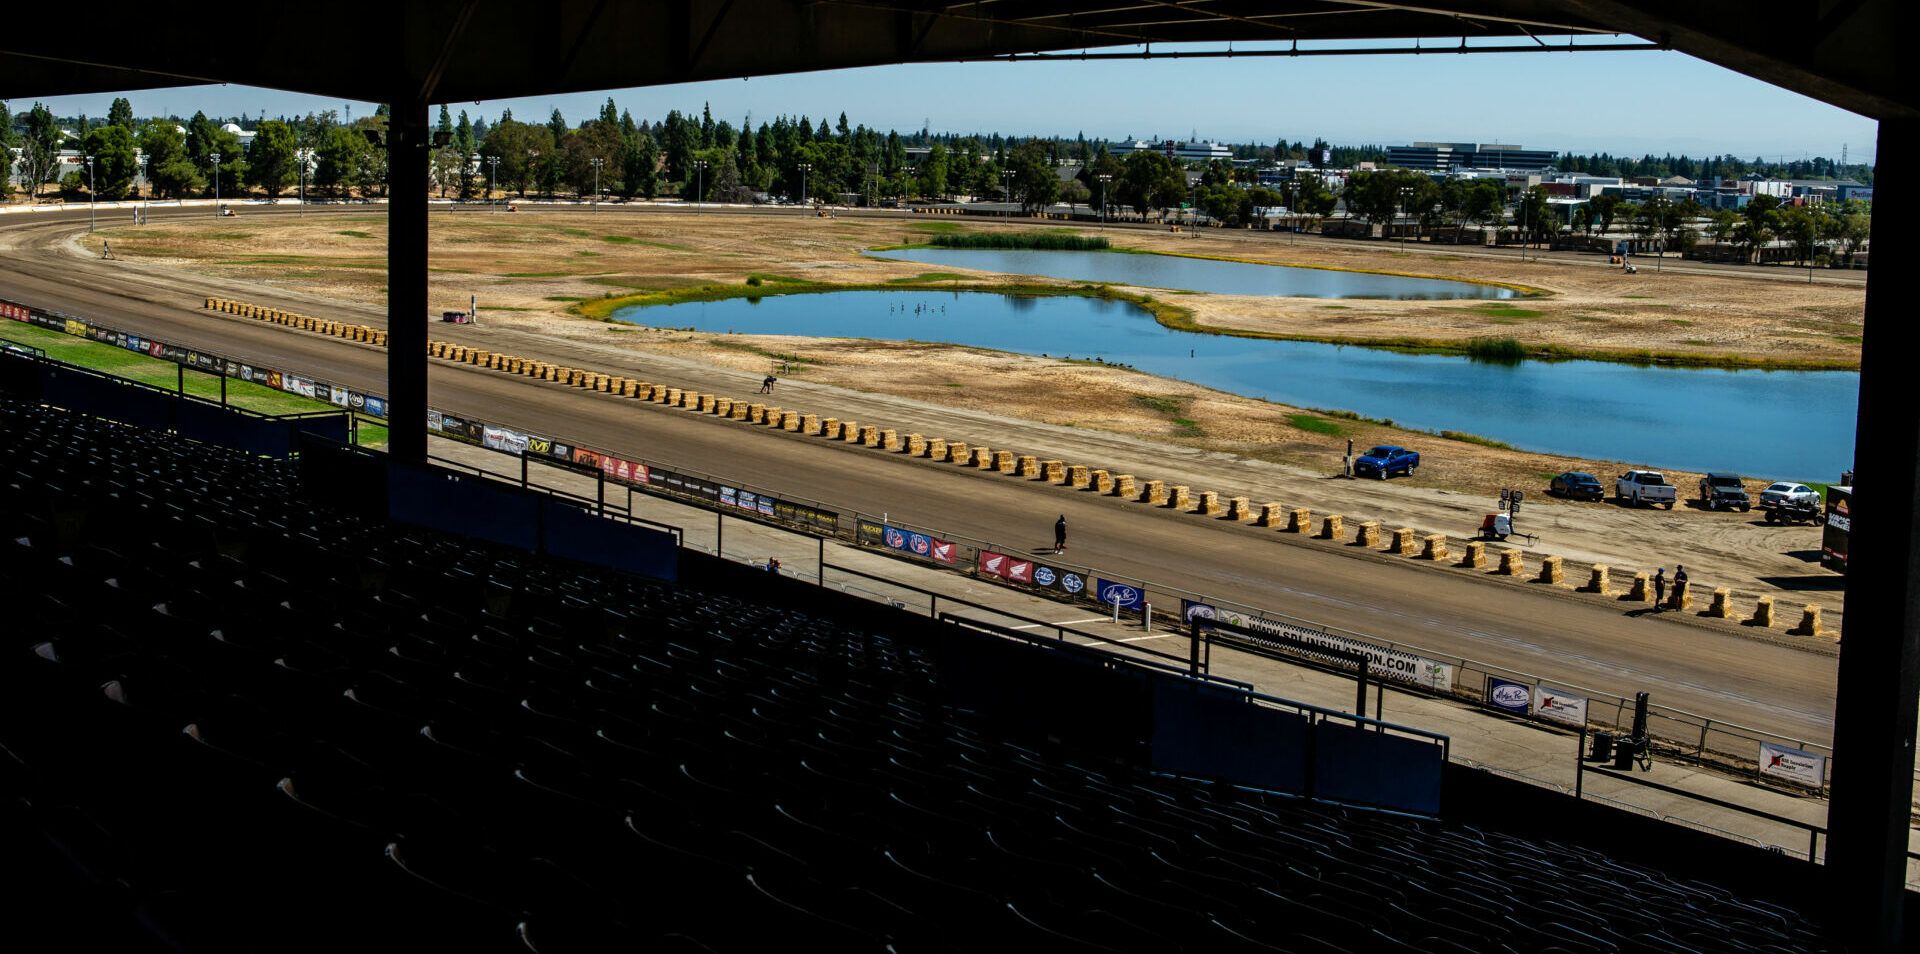 The one-mile track at the Cal Expo in Sacramento, California. Photo by Tim Lester, courtesy AFT.